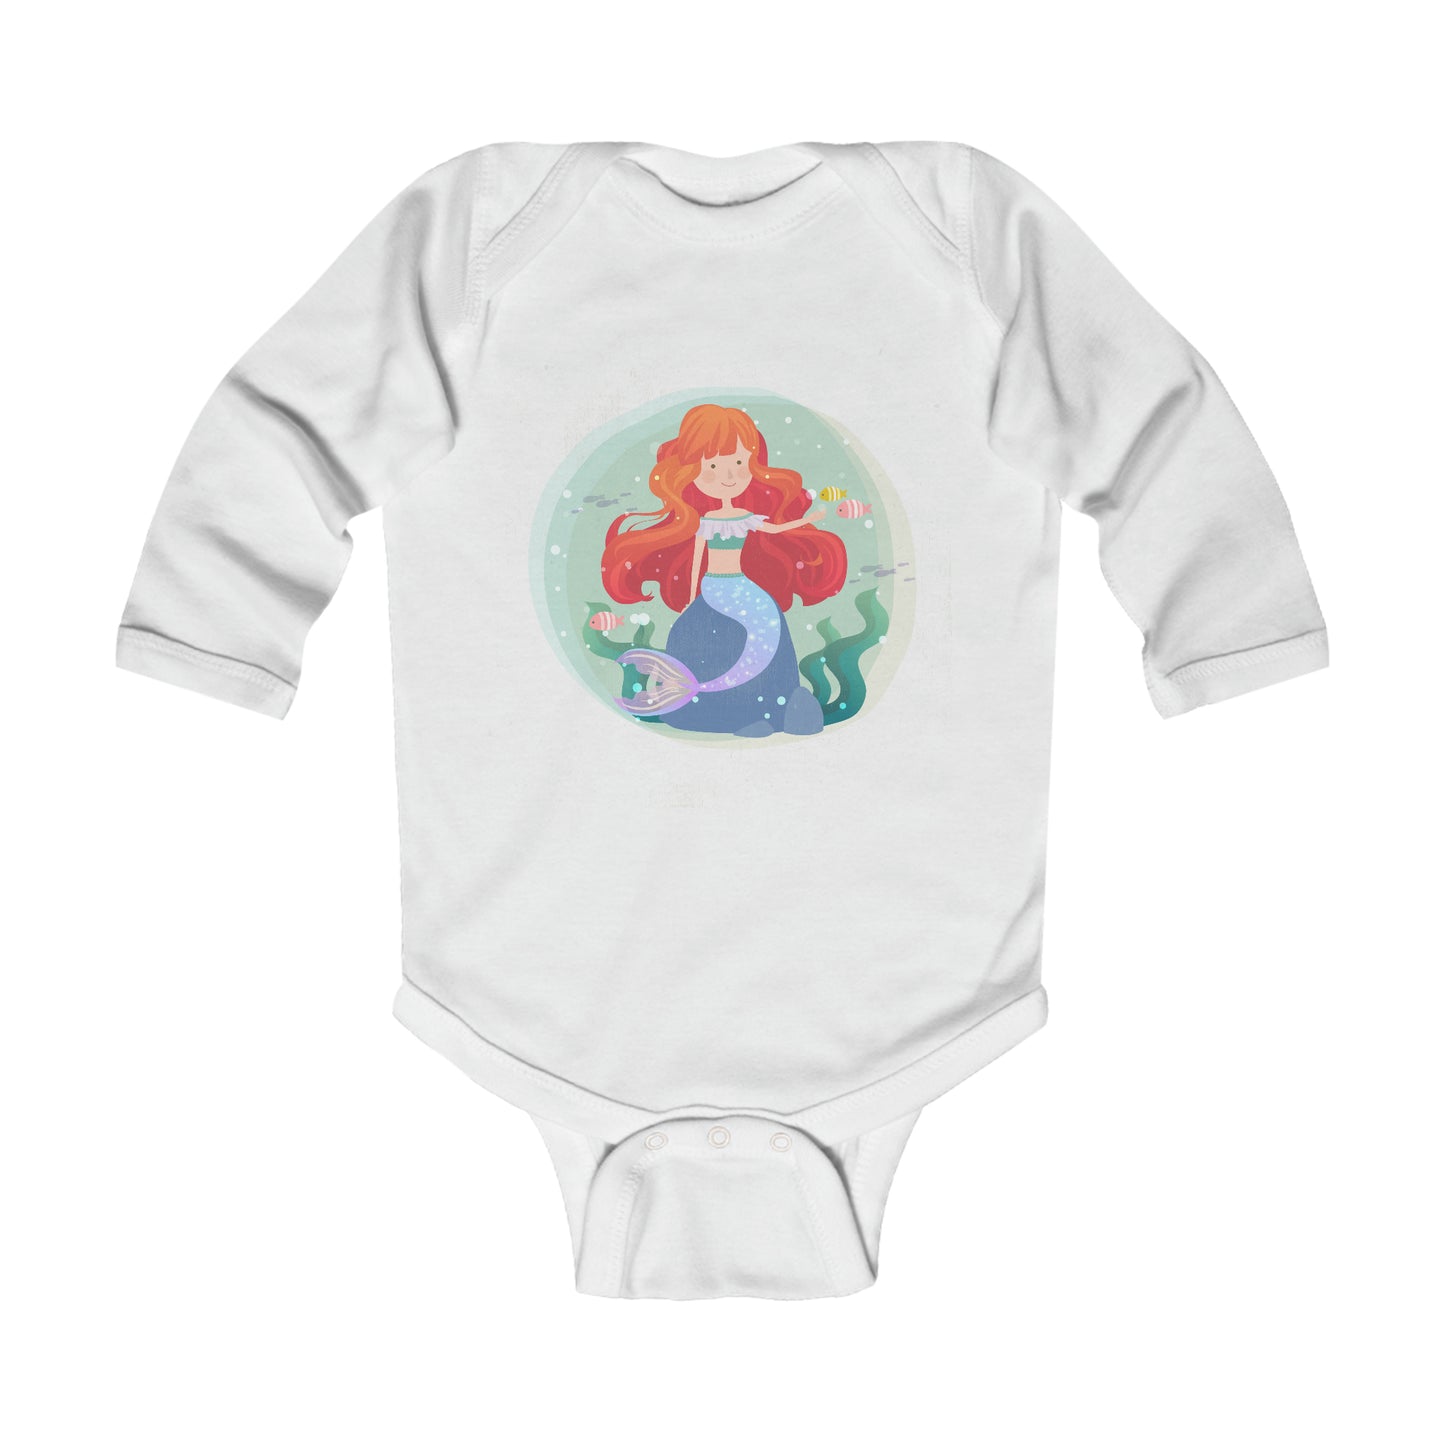 Niccie's Adorable Mermaid Infant Long Sleeve Bodysuit Comfort for Your Baby